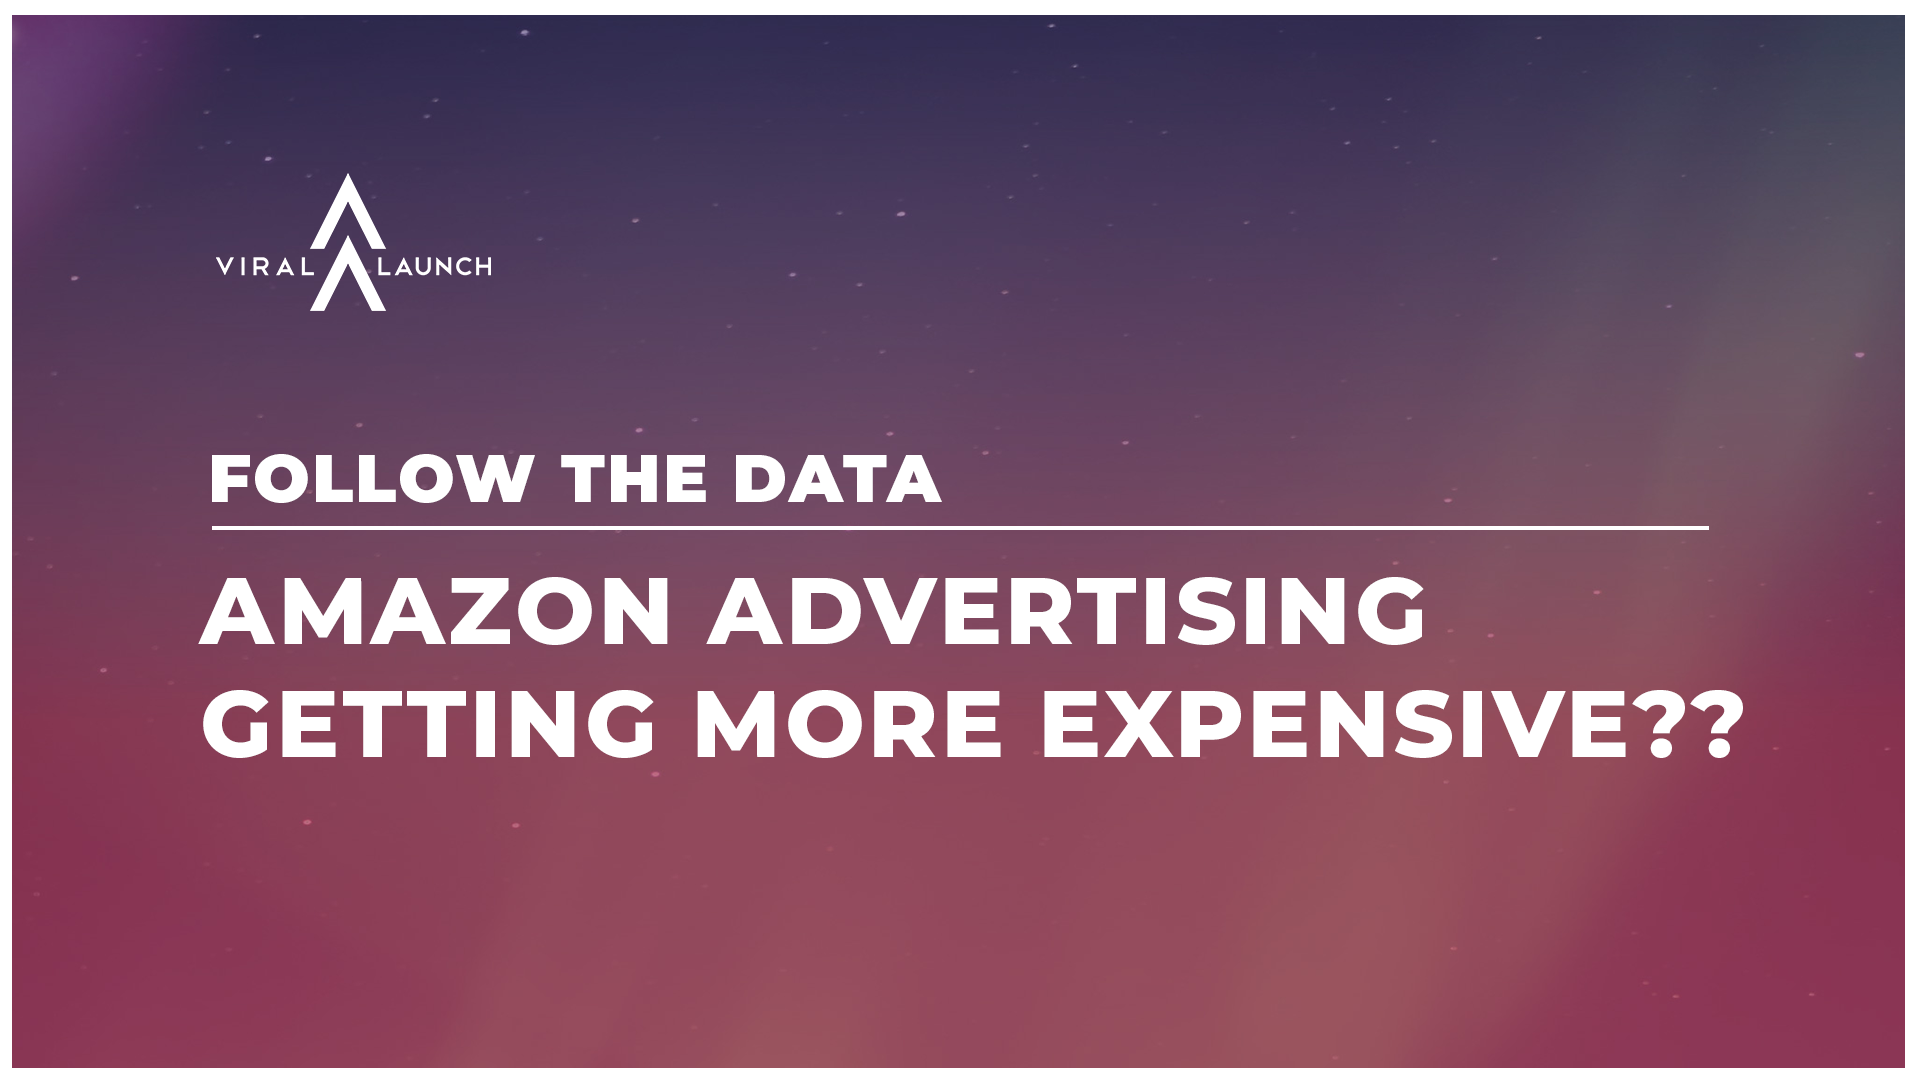 Amazon Advertising Getting More Expensive??